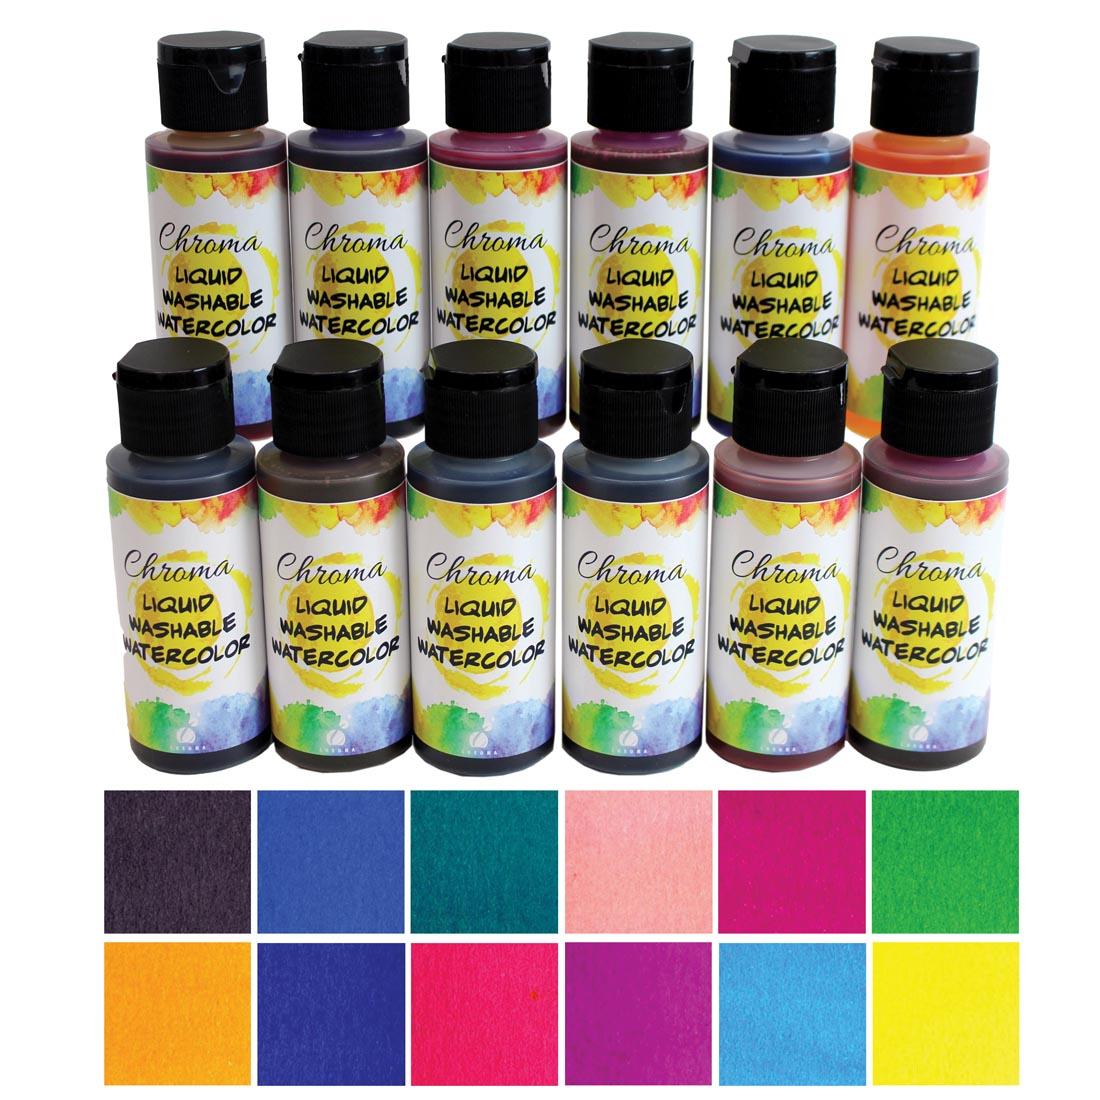 bottles of the Chroma Liquid Washable Watercolor 12-Color Set with color swatches below